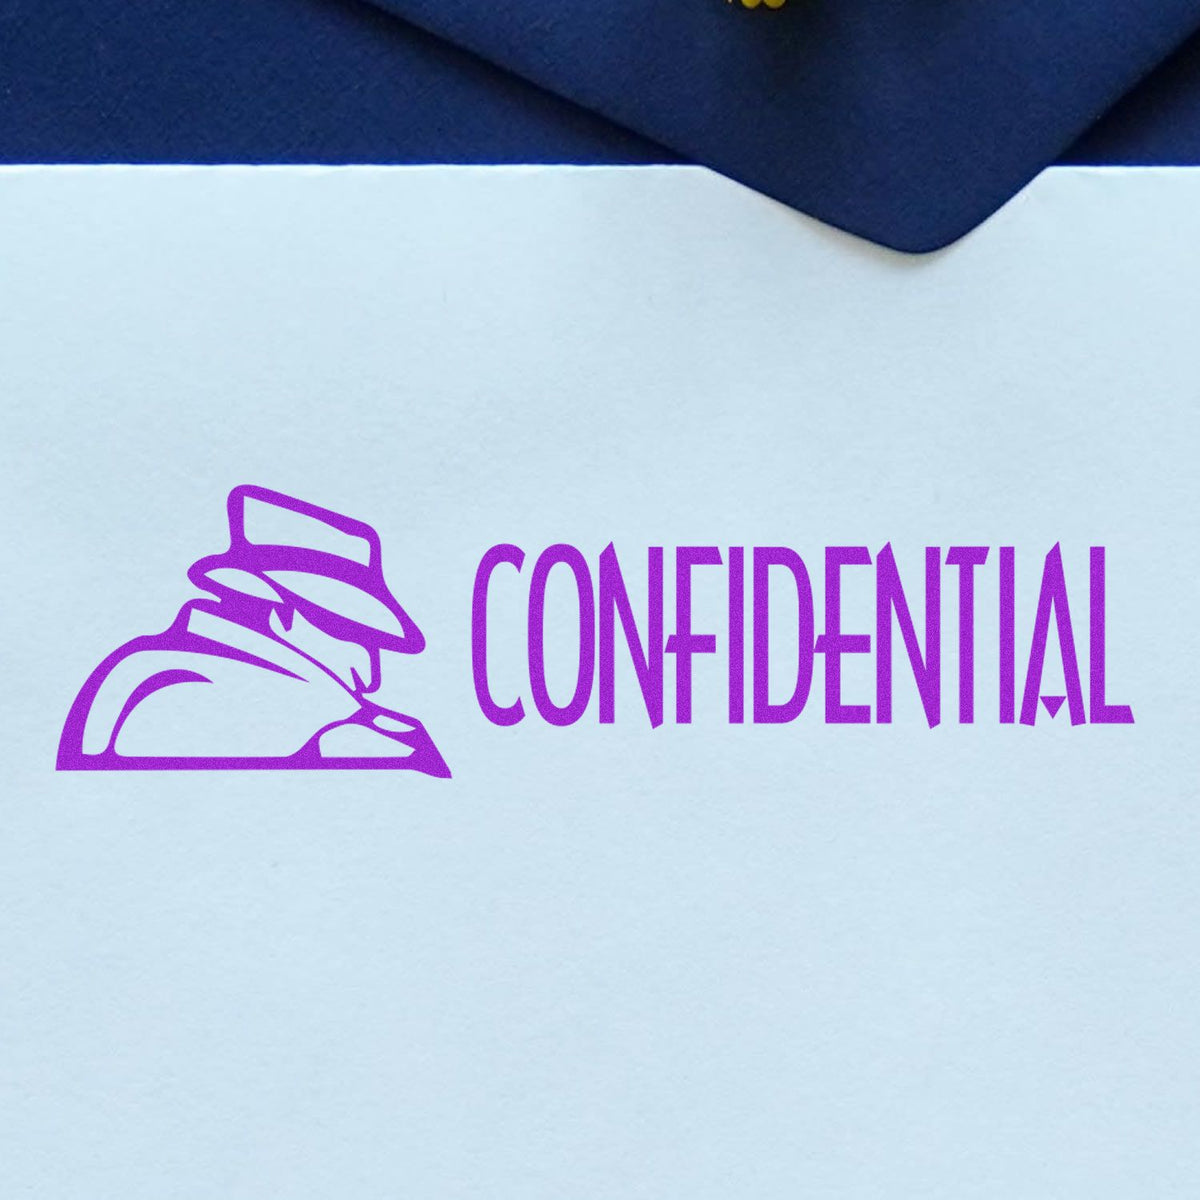 Large Pre-Inked Confidential with Logo Stamp In Use